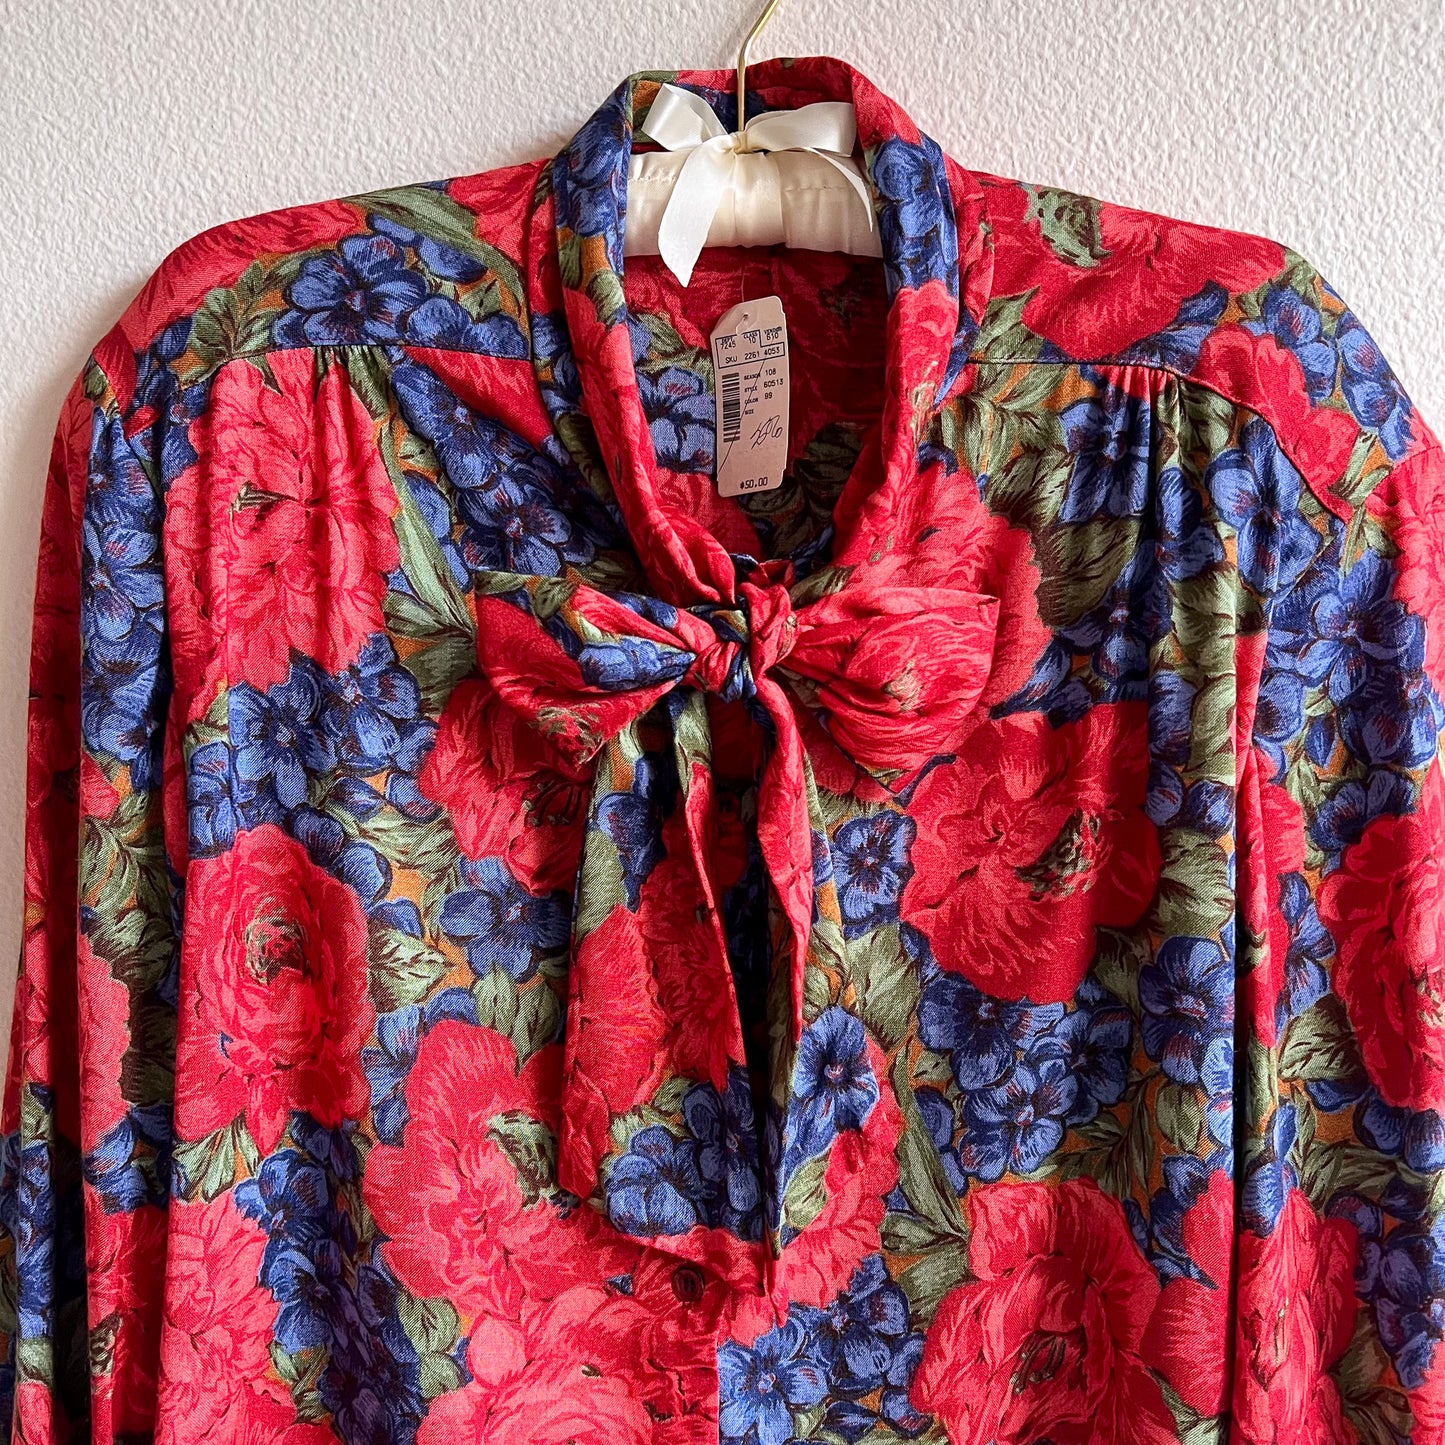 Deadstock 1990s Bountiful Red Roses Blouse (L/XL)